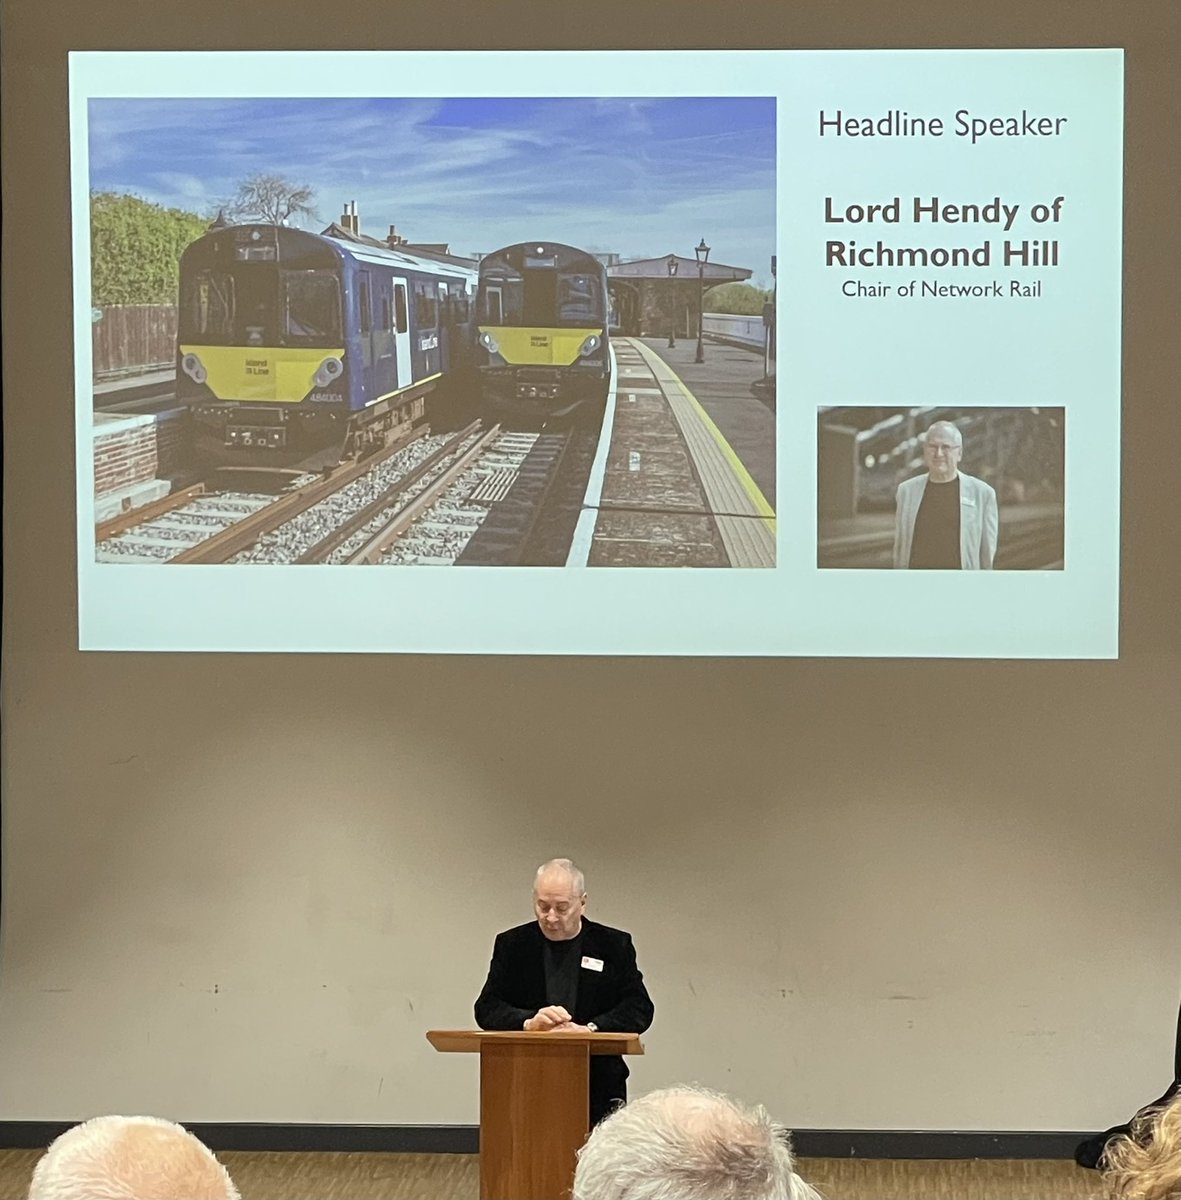 Many thanks to @SirPeterHendy for giving the keynote speech today at the IW Steam Railway Volunteers’ Conference.